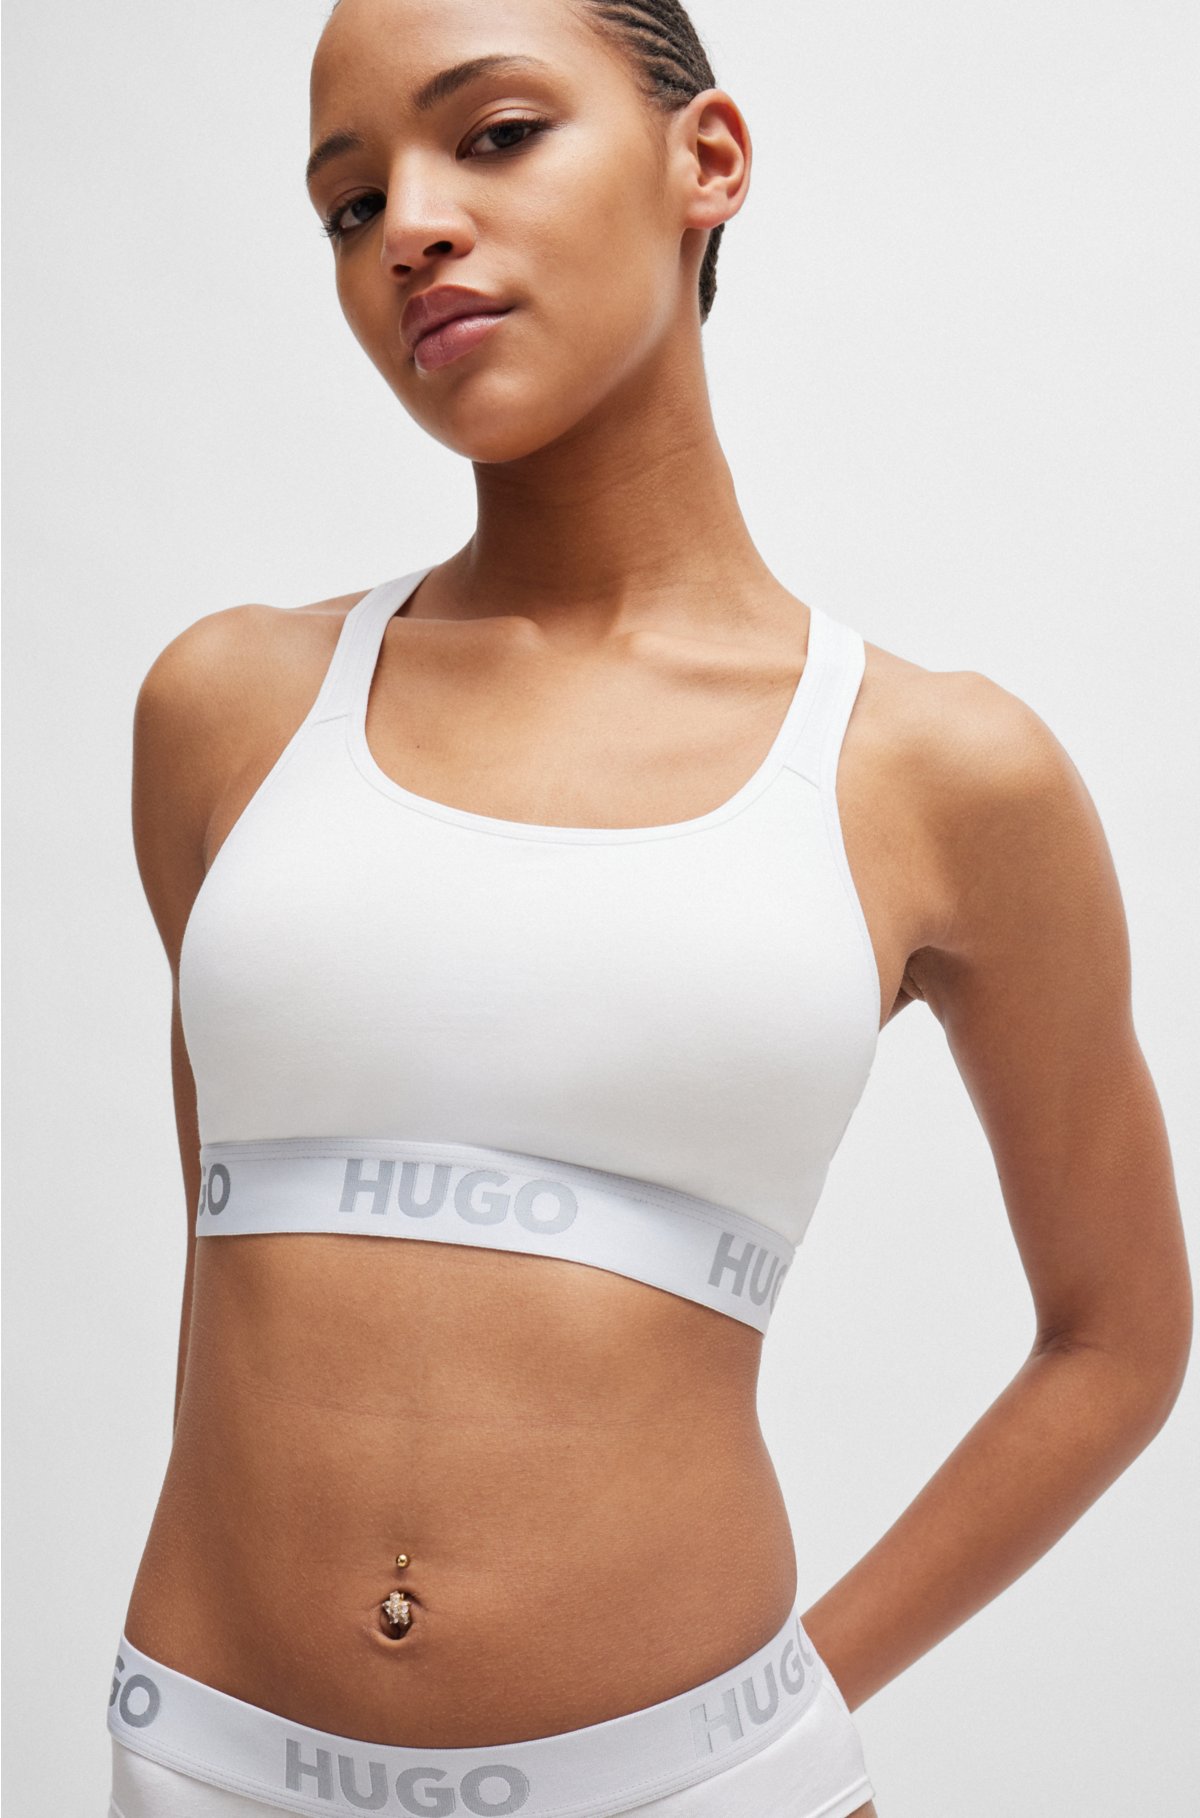 logos Sports with - cotton repeat in HUGO stretch bra